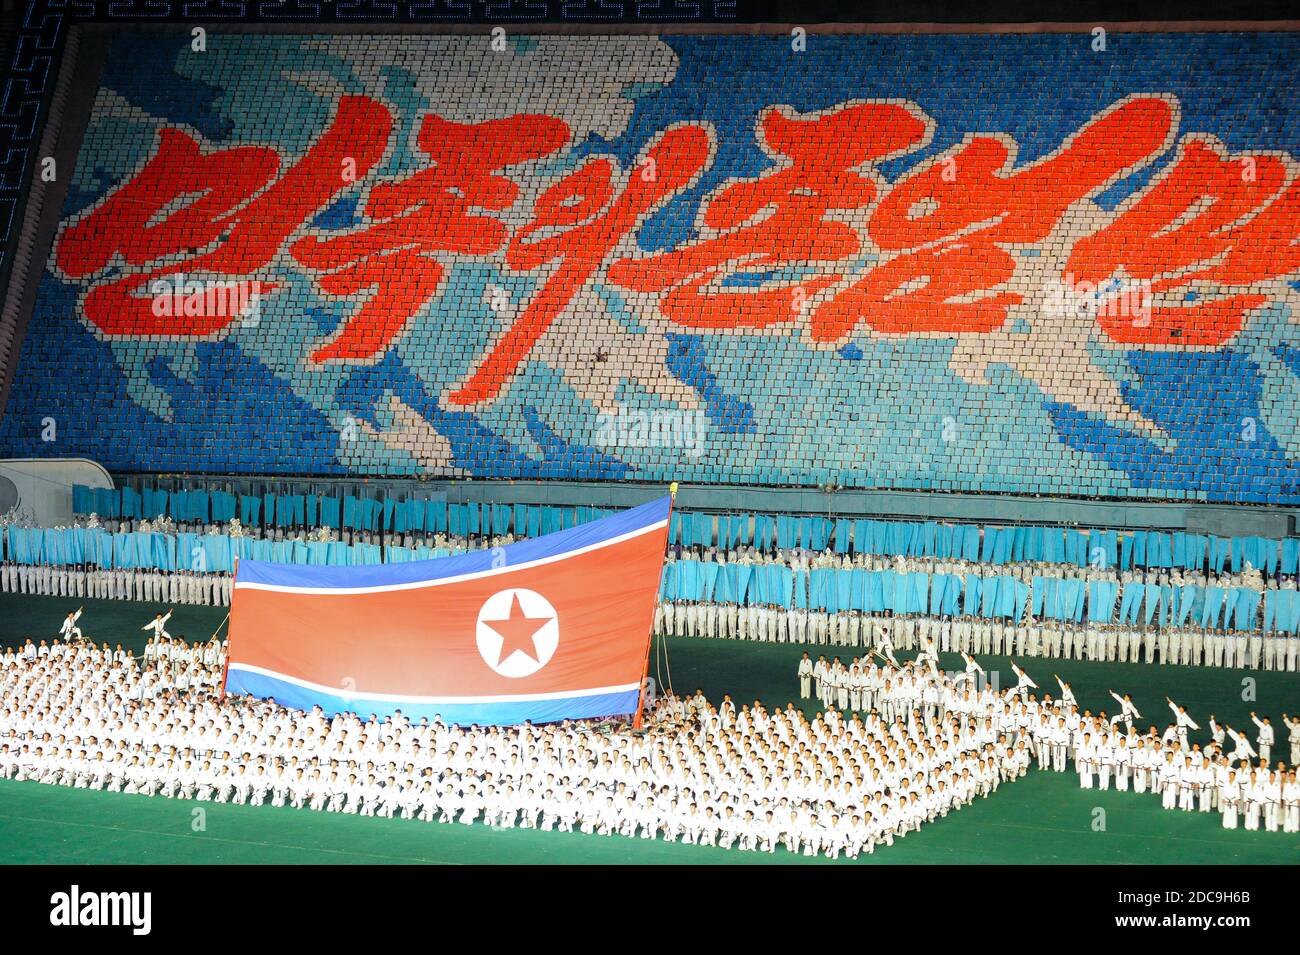 08.08.2012, Pyongyang, , North Korea - Several thousand people will form huge mosaic pictures with colorful posters on the stands at the May Day Stadi Stock Photo